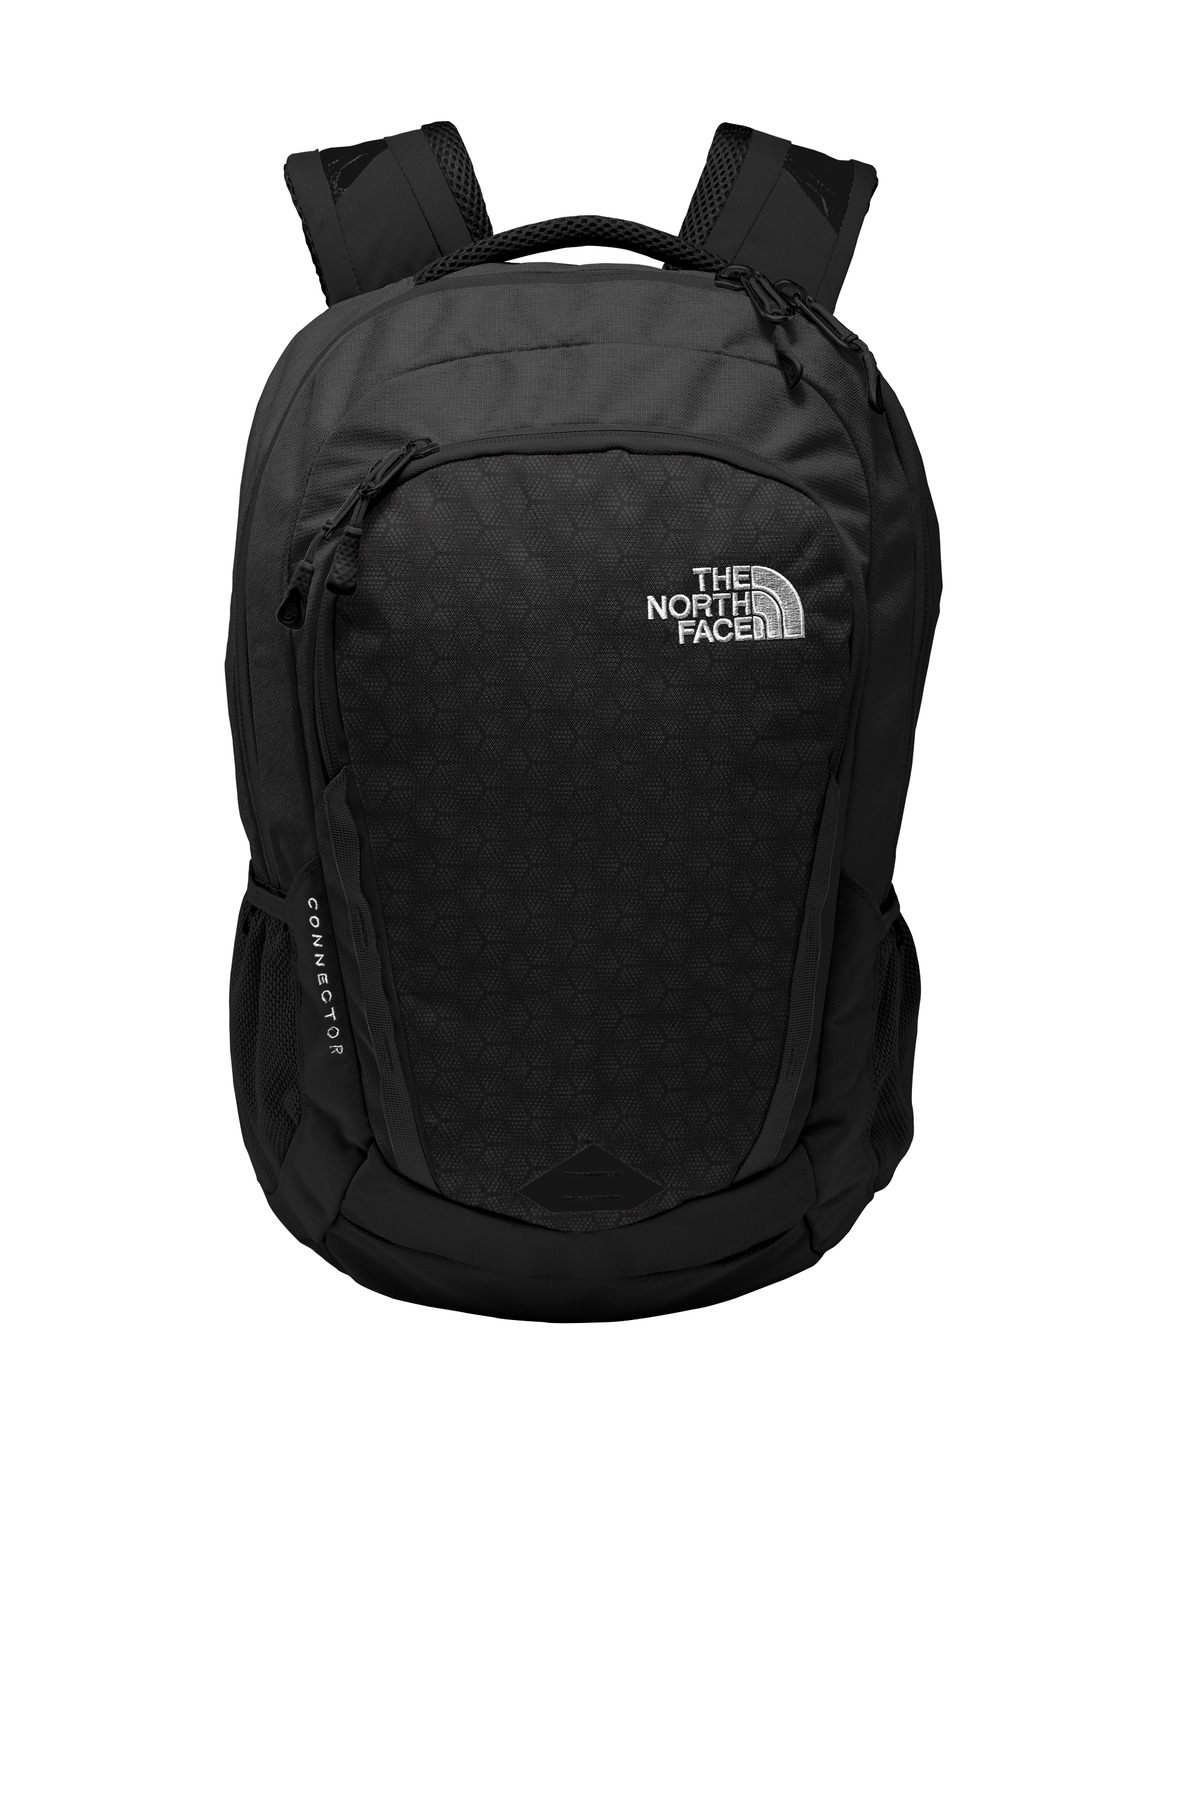 The North Face Connector Backpack-